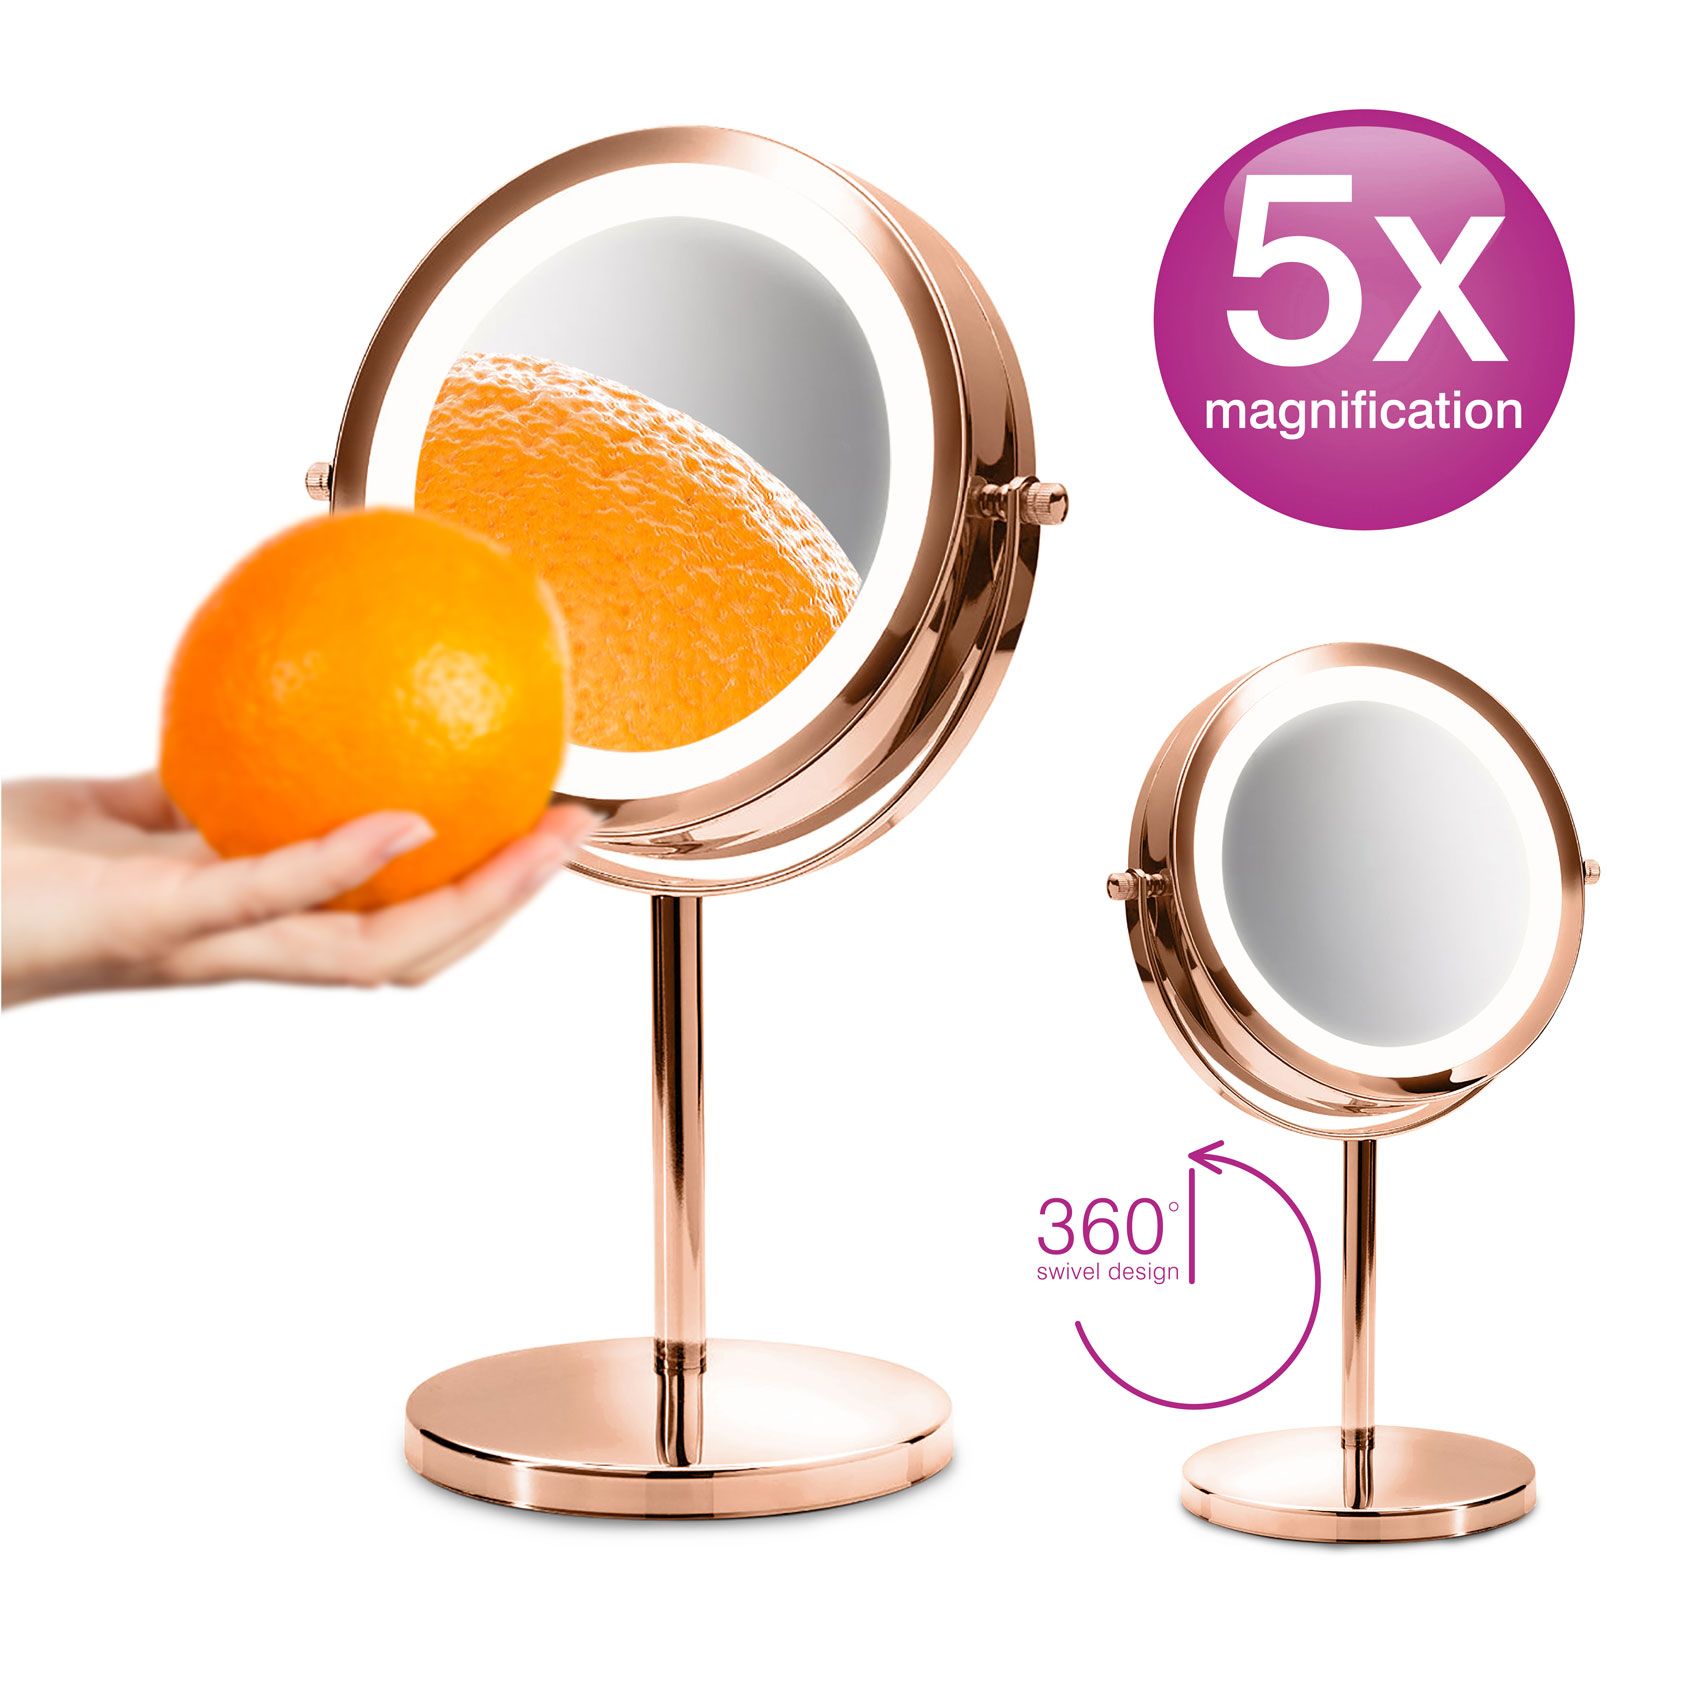 Rose gold double sided cosmetic LED mirror with orange in front of it reflecting the 5X magnification on the texture of the orange peel with inset image of mirror tilted back to demonstrate 360 swivel design 